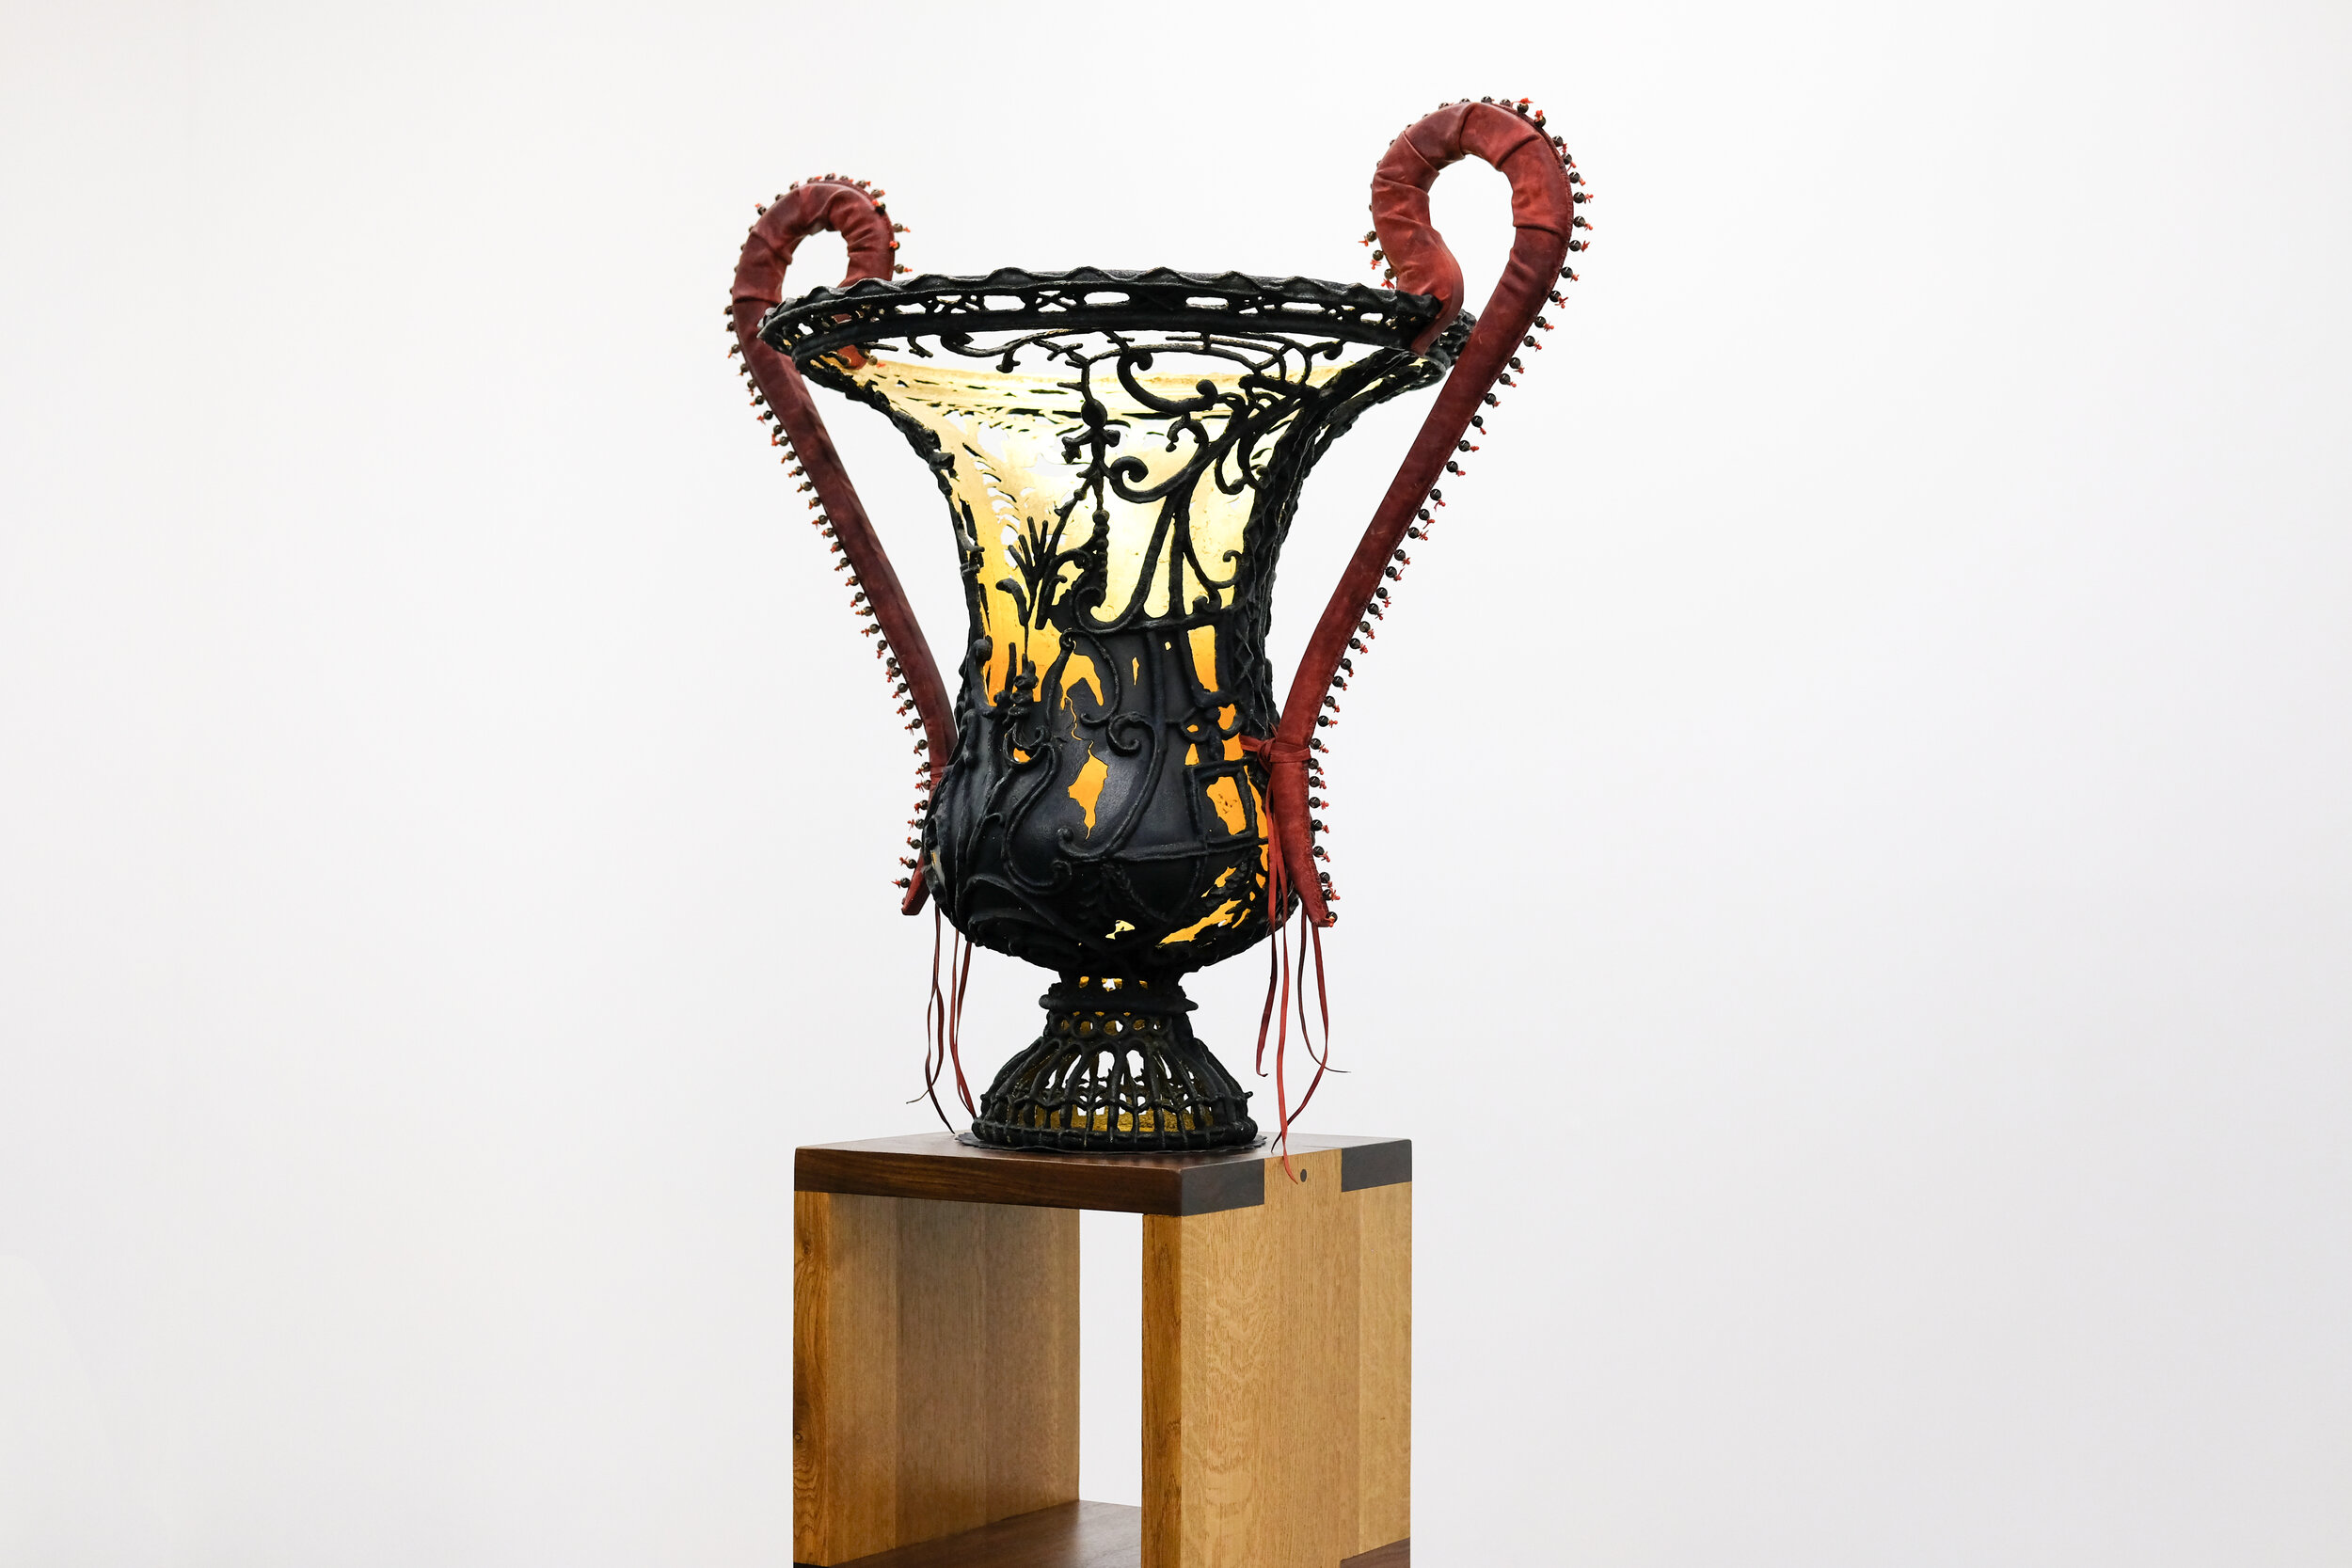  Joel Otterson  Four-in-hand , 2018 cast brass, leather, black tourmaline, coral and 24k gold 40 3/4 x 41 x 29 in (103.5 x 104.1 x 73.7 cm) 